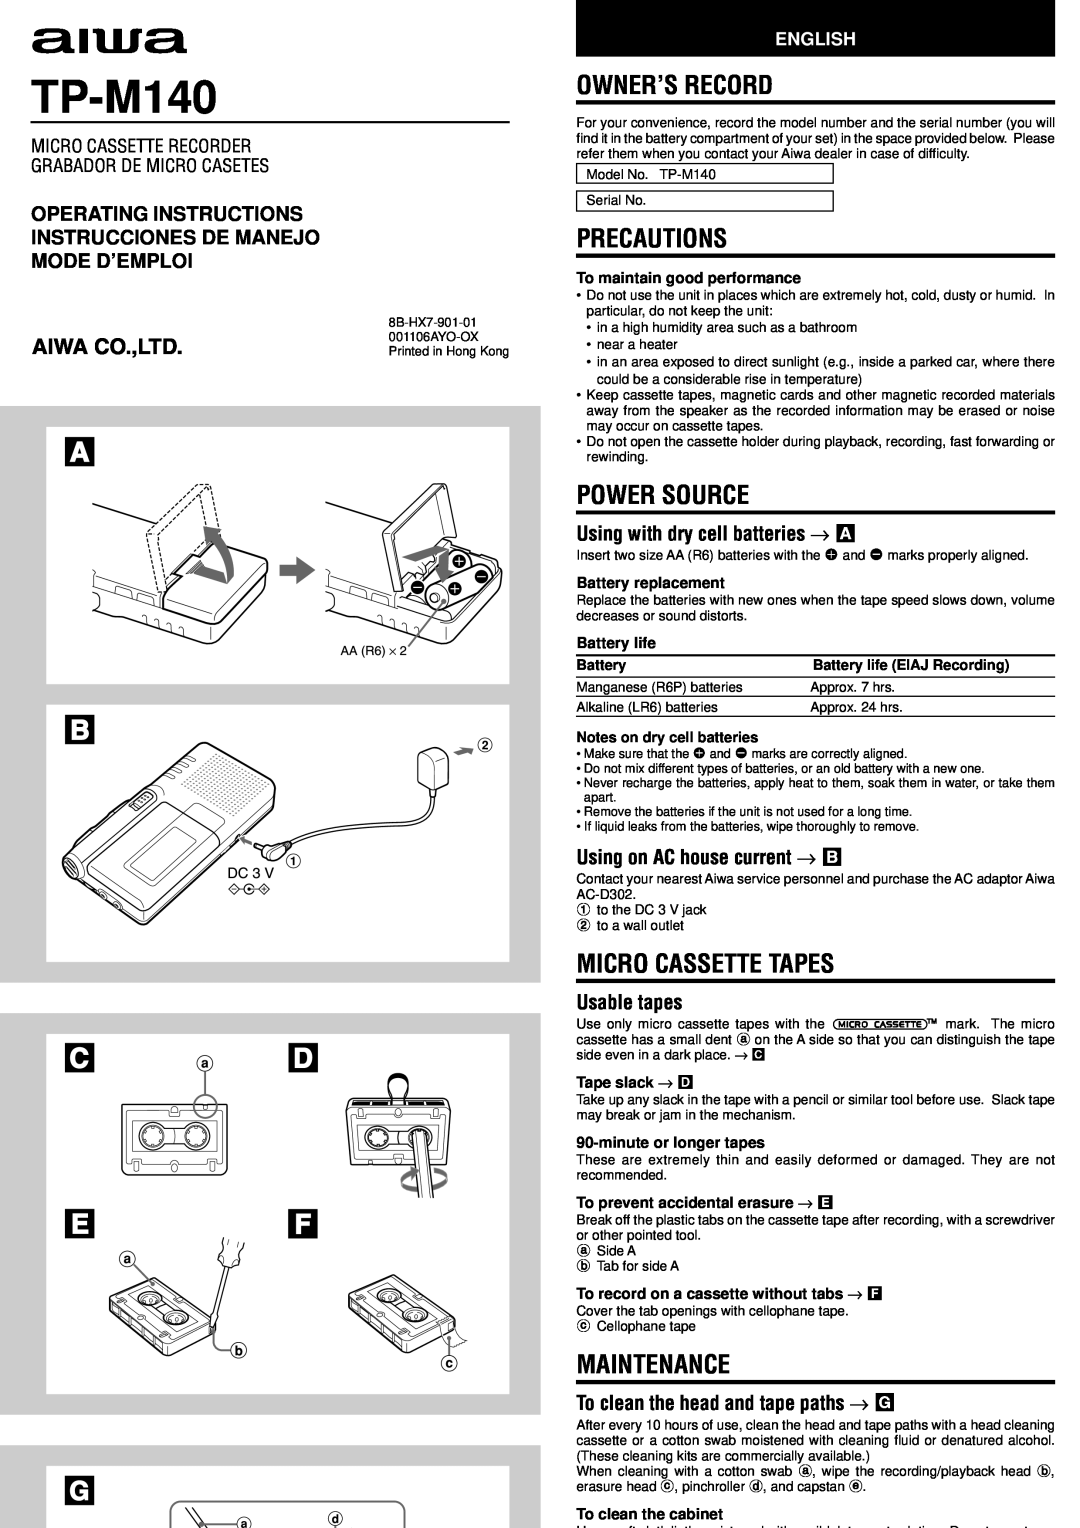 Aiwa TP-M140 operating instructions A B C D E F G, Owner’S Record, Precautions, Power Source, Micro Cassette Tapes 